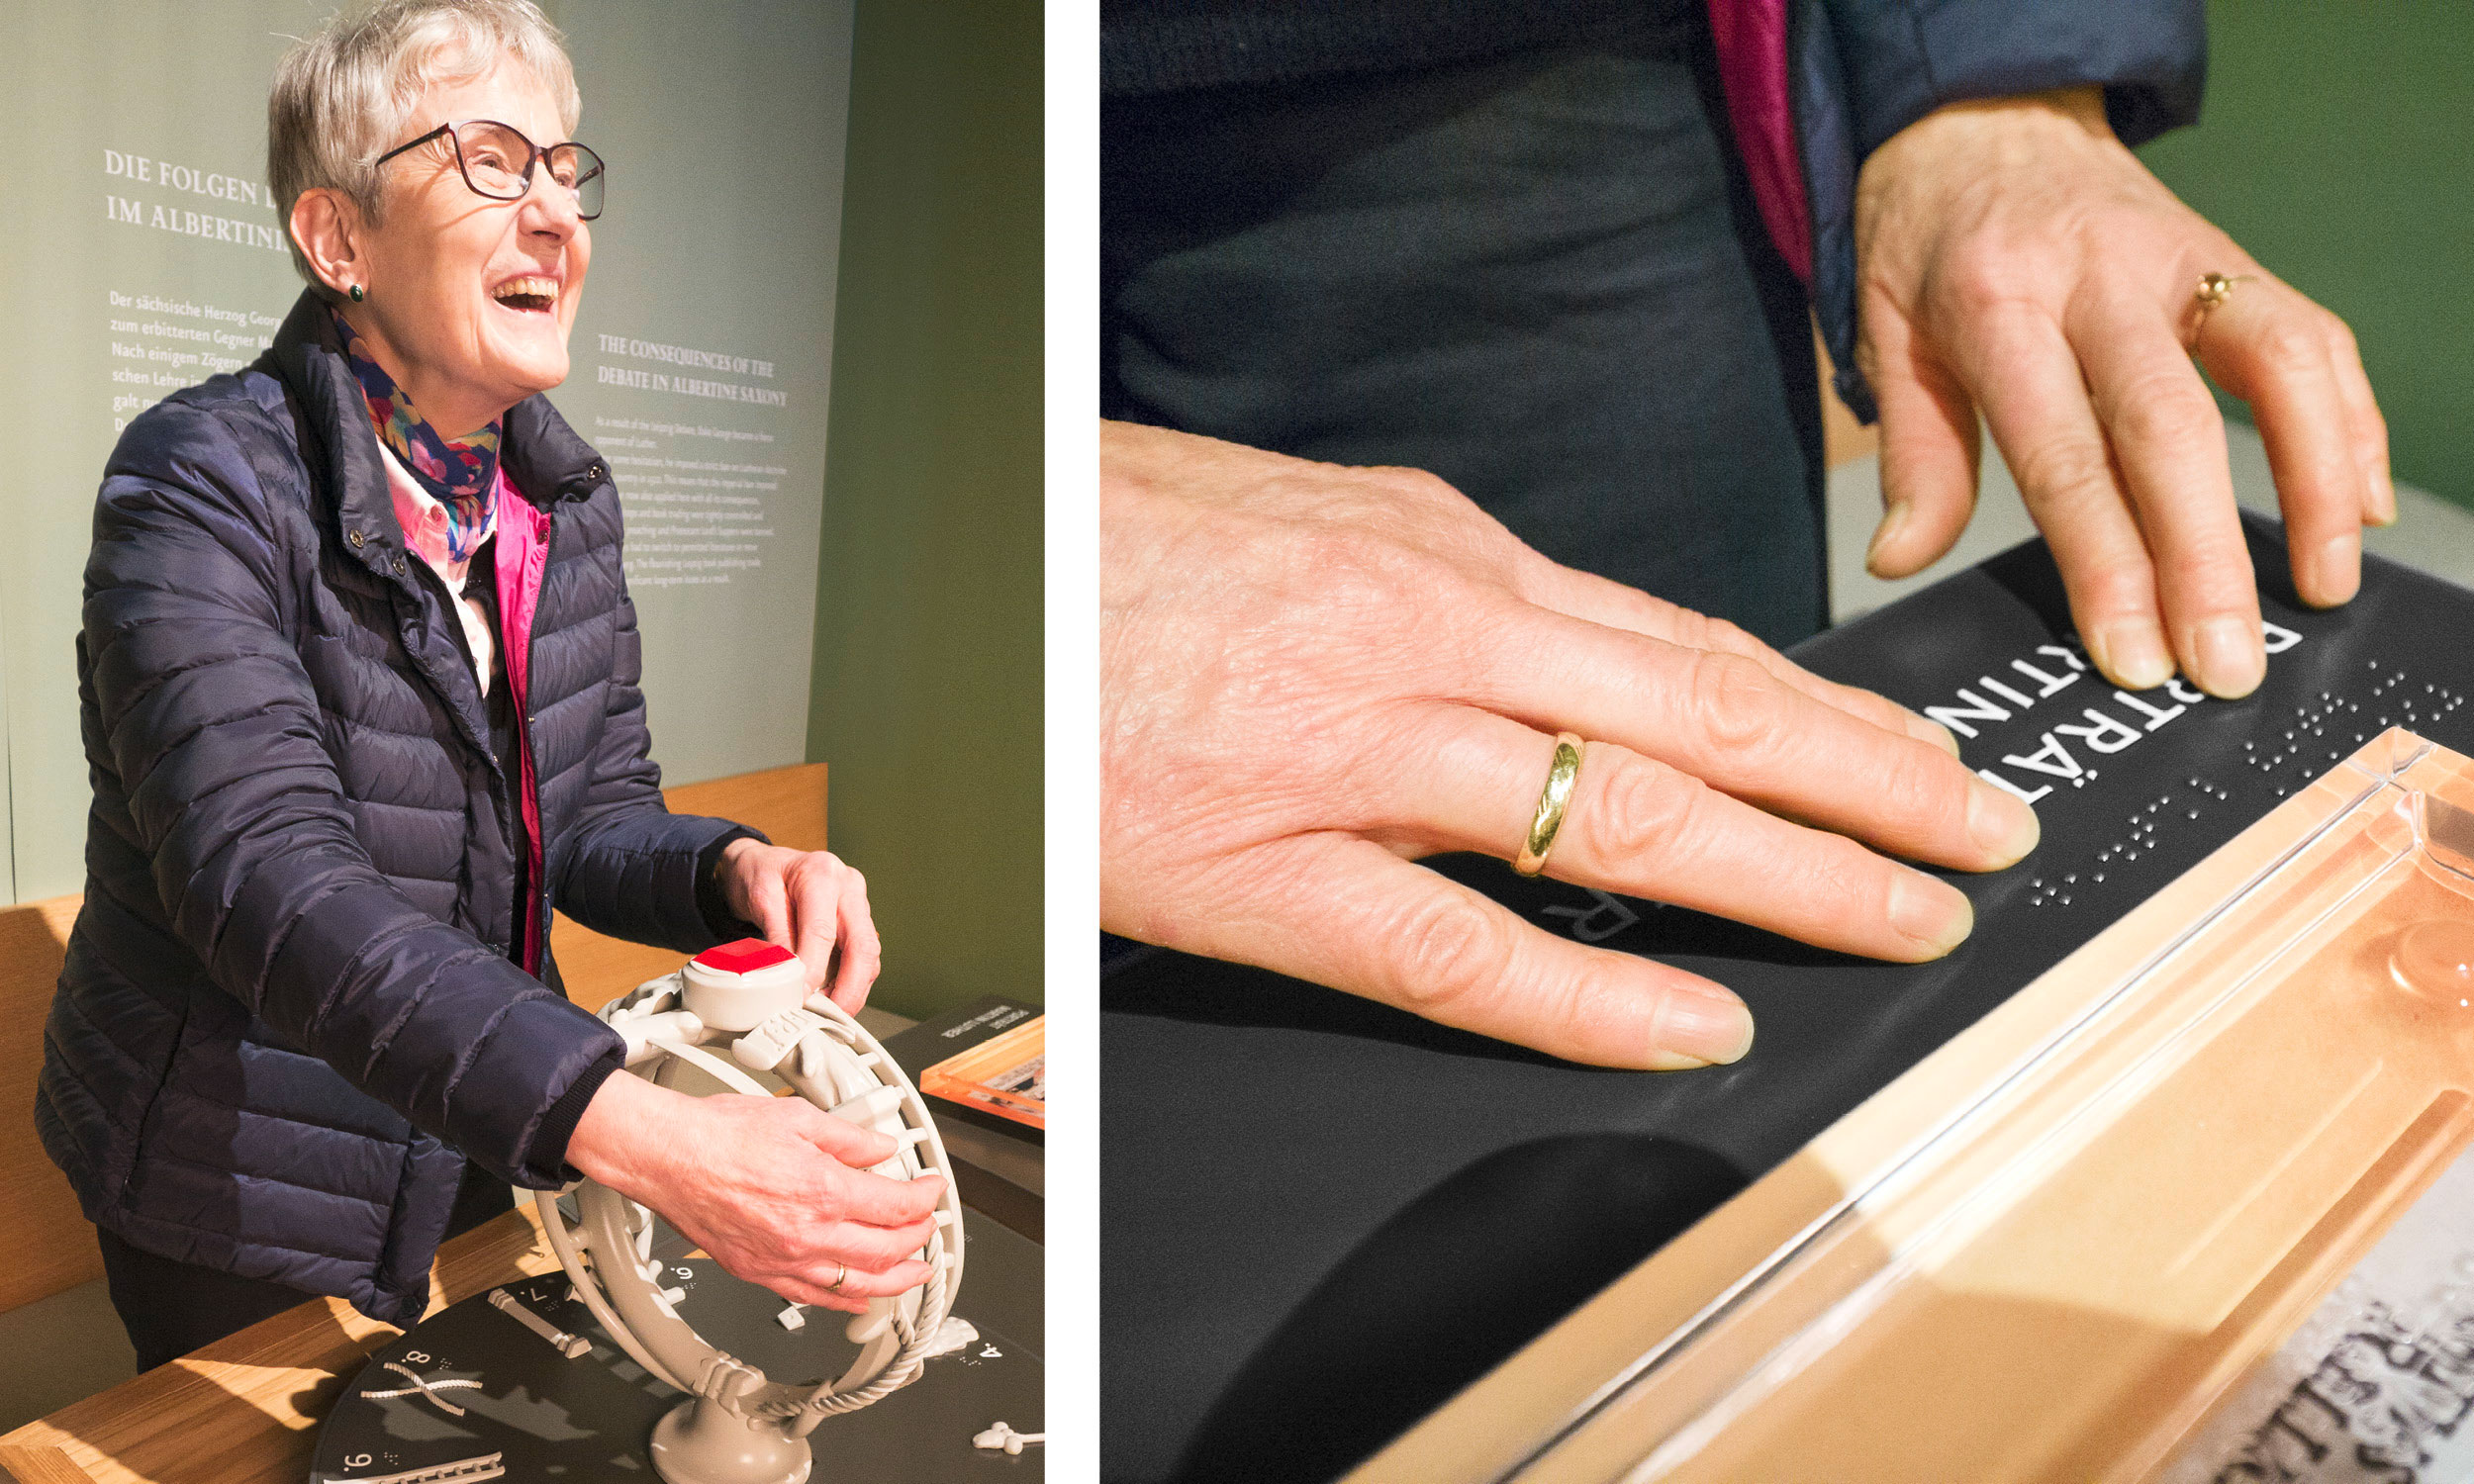 Left: Photo of a standing blind woman palpating the tactile model of the wedding ring of Katharina von Bora. Right: Detail photo of two hands palpating the Braille of the tactile station.